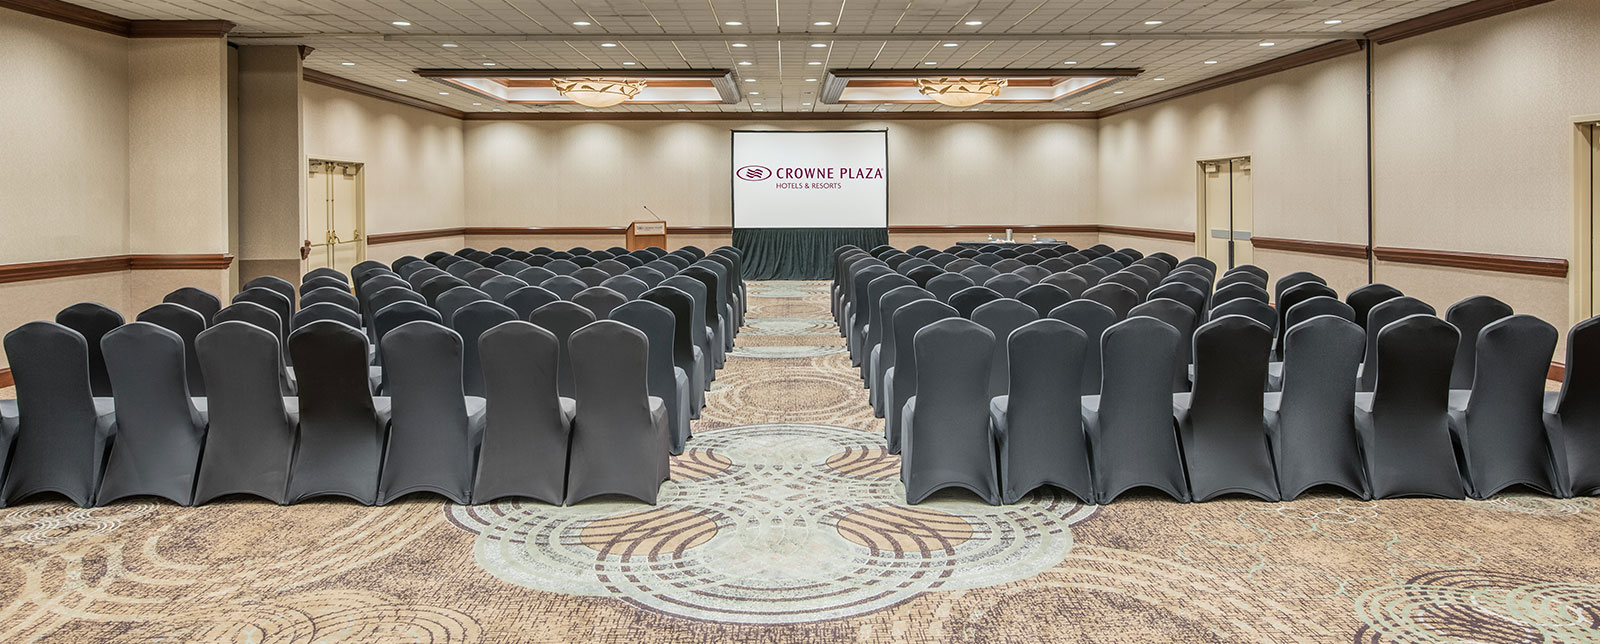 Meetings & Events at Crowne Plaza Knoxville Downtown University Hotel, Tennessee